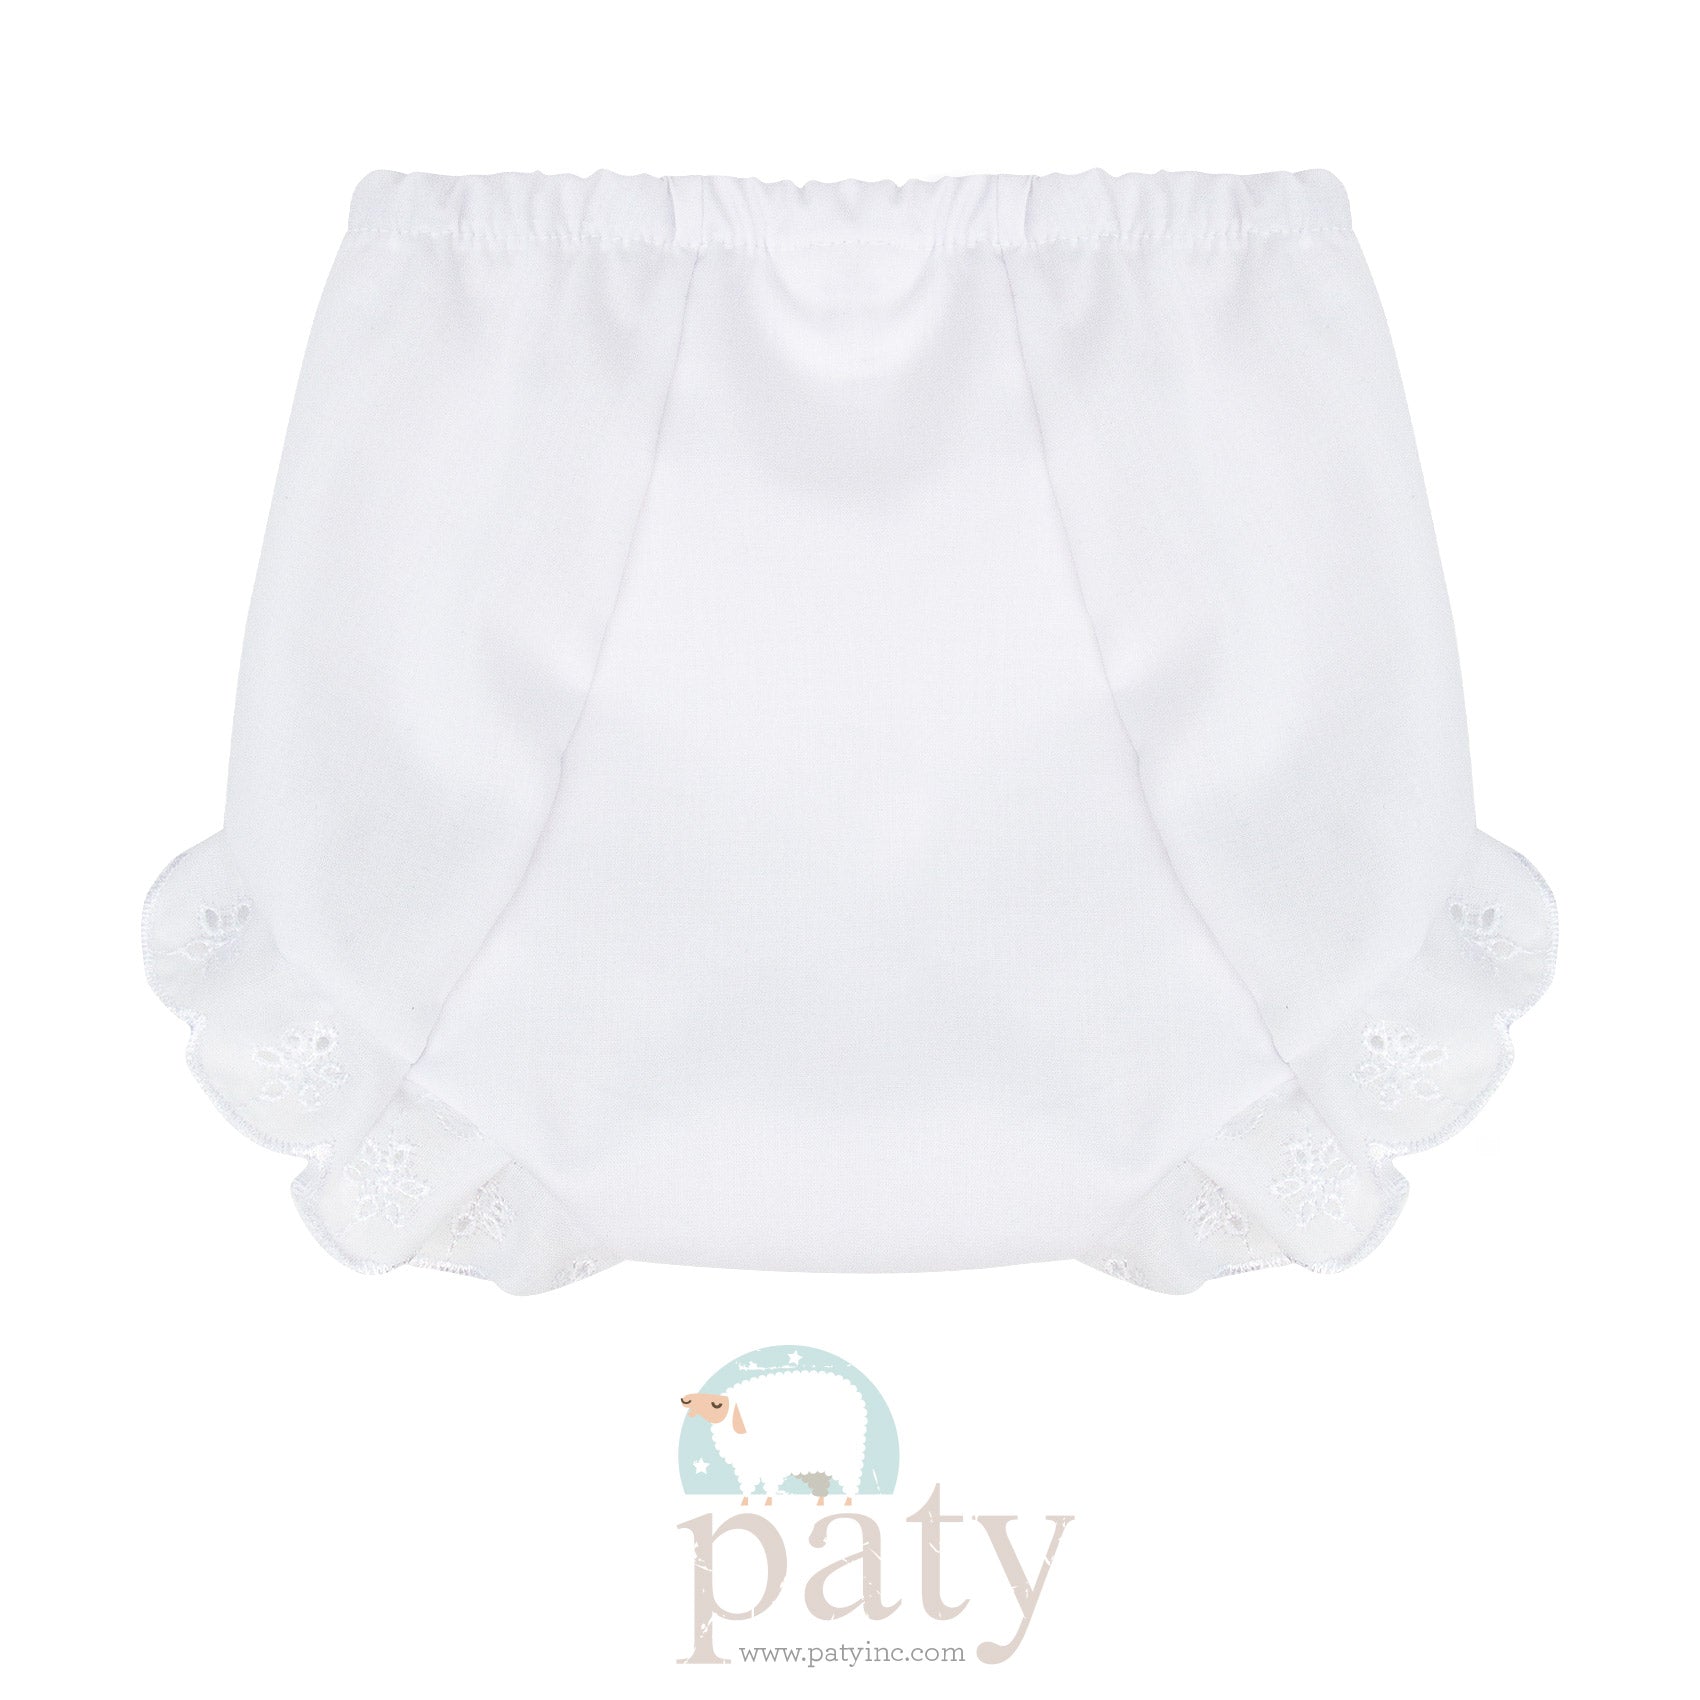 White Diaper Cover with Eyelet Lace  - Doodlebug's Children's Boutique